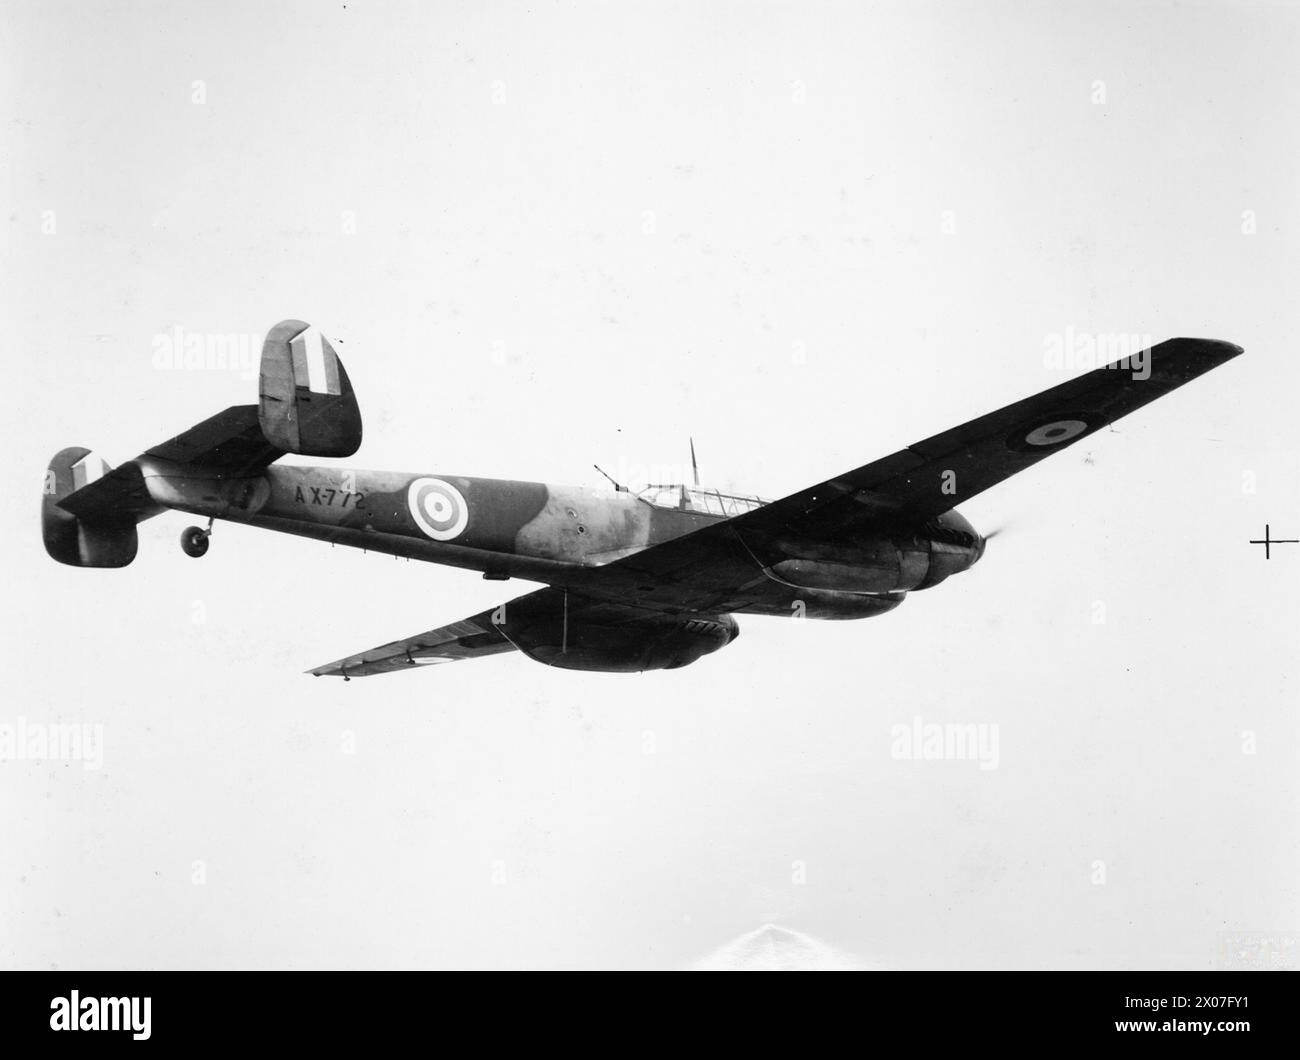 ROYAL AIR FORCE FIGHTER COMMAND, 1939-1945. - Messerschmitt Bf 110C-5, AX772, of No. 1426 (Enemy Aircraft Circus) Flight based at Duxford, Cambridgeshire, in flight. Originally '5F-CM' of 4(F)/14, this aircraft was intercepted by RAF fighters while on a reconnaissance mission on the morning of 21 July 1940. After being forced down near Goodwood racecourse, Sussex, it was taken to the Royal Aircraft Establishment and repaired with parts from another Bf 110C-5 forced down earlier. After handling trials with the RAE, it was flown to the Air Fighting Development Unit at Duxford, Cambridgeshire, as Stock Photo